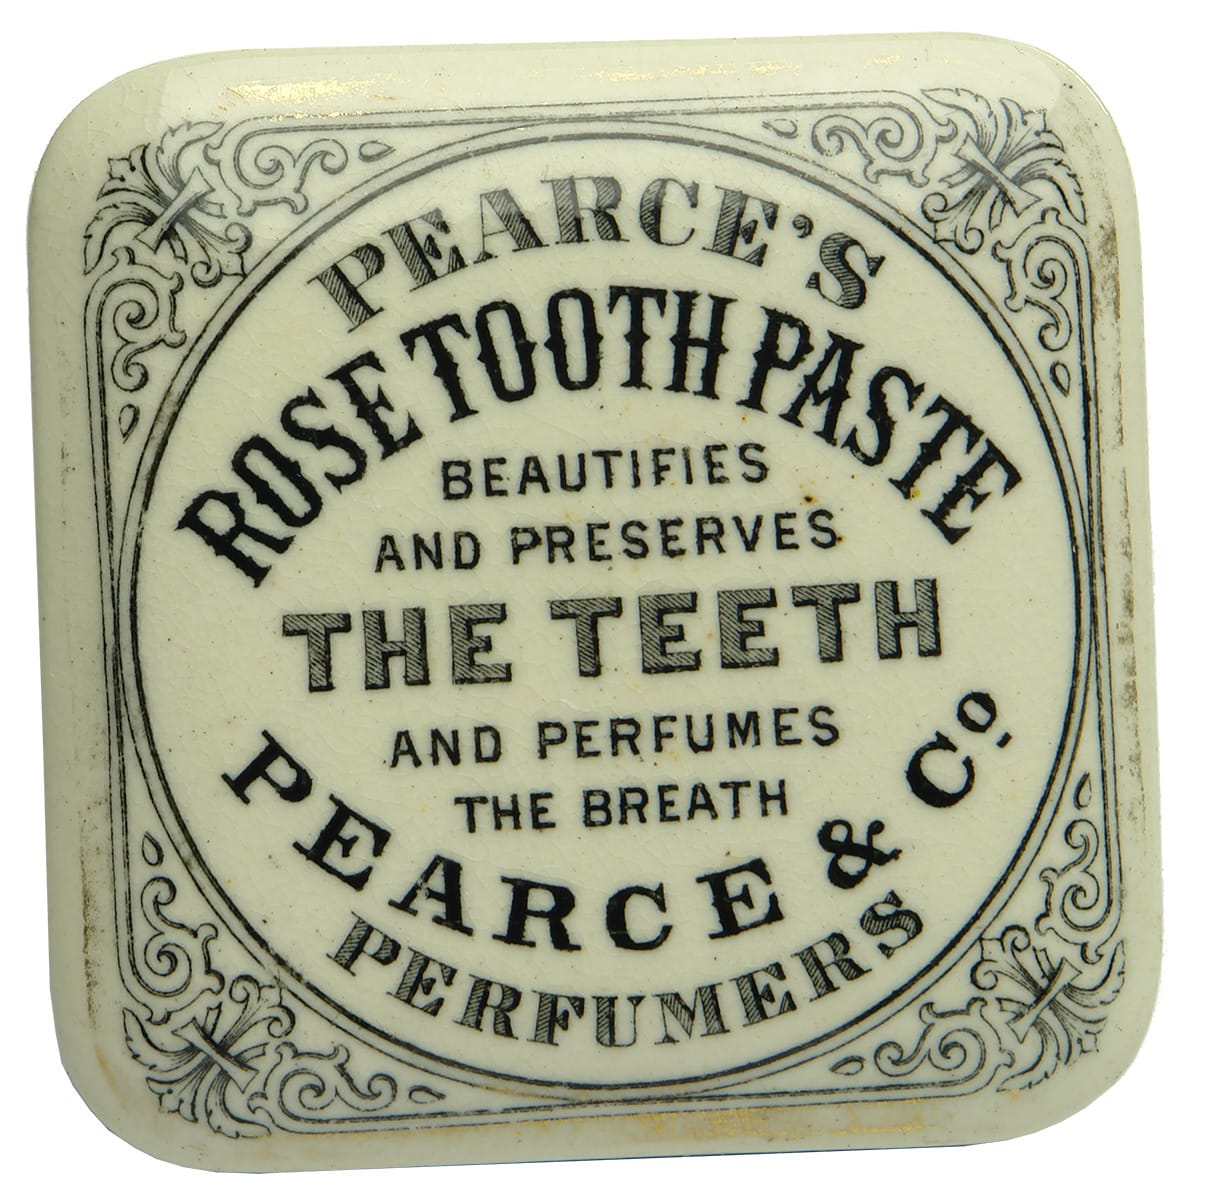 Pearce's Rose Tooth Paste Antique Pot Lid